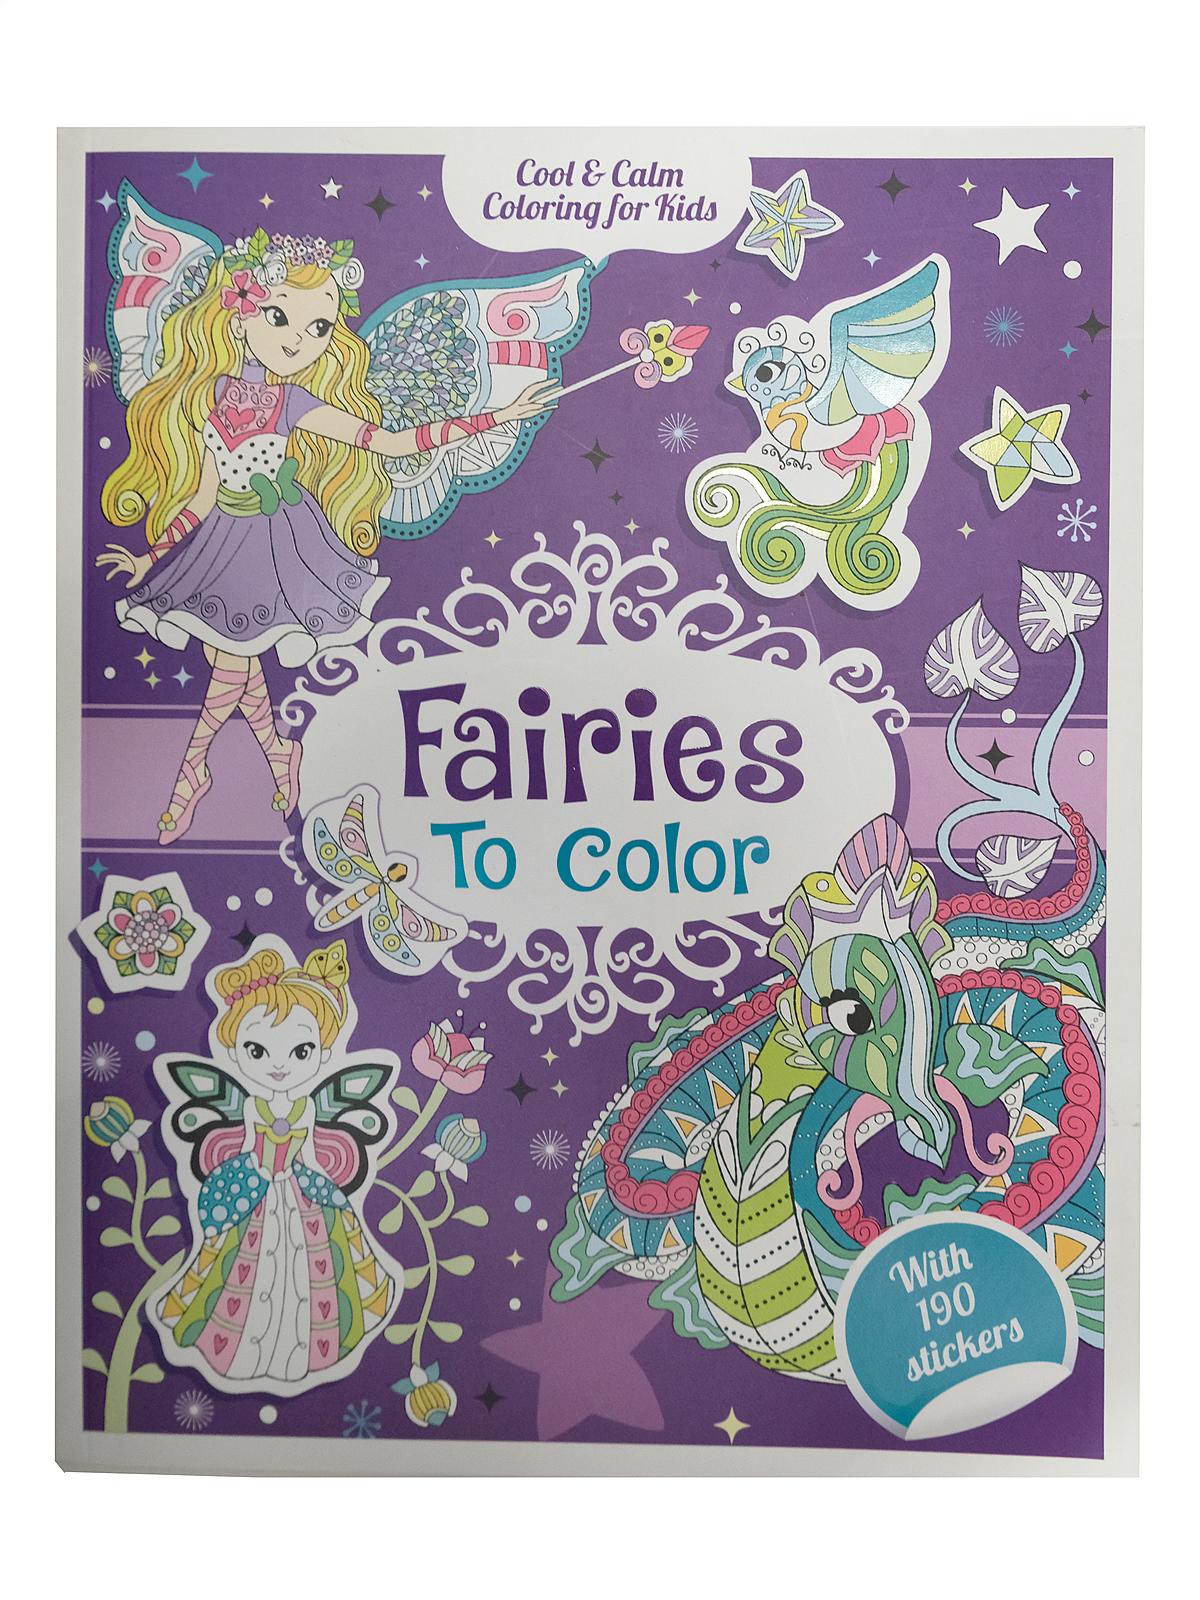 Cool & Calm Coloring For Kids Fairies